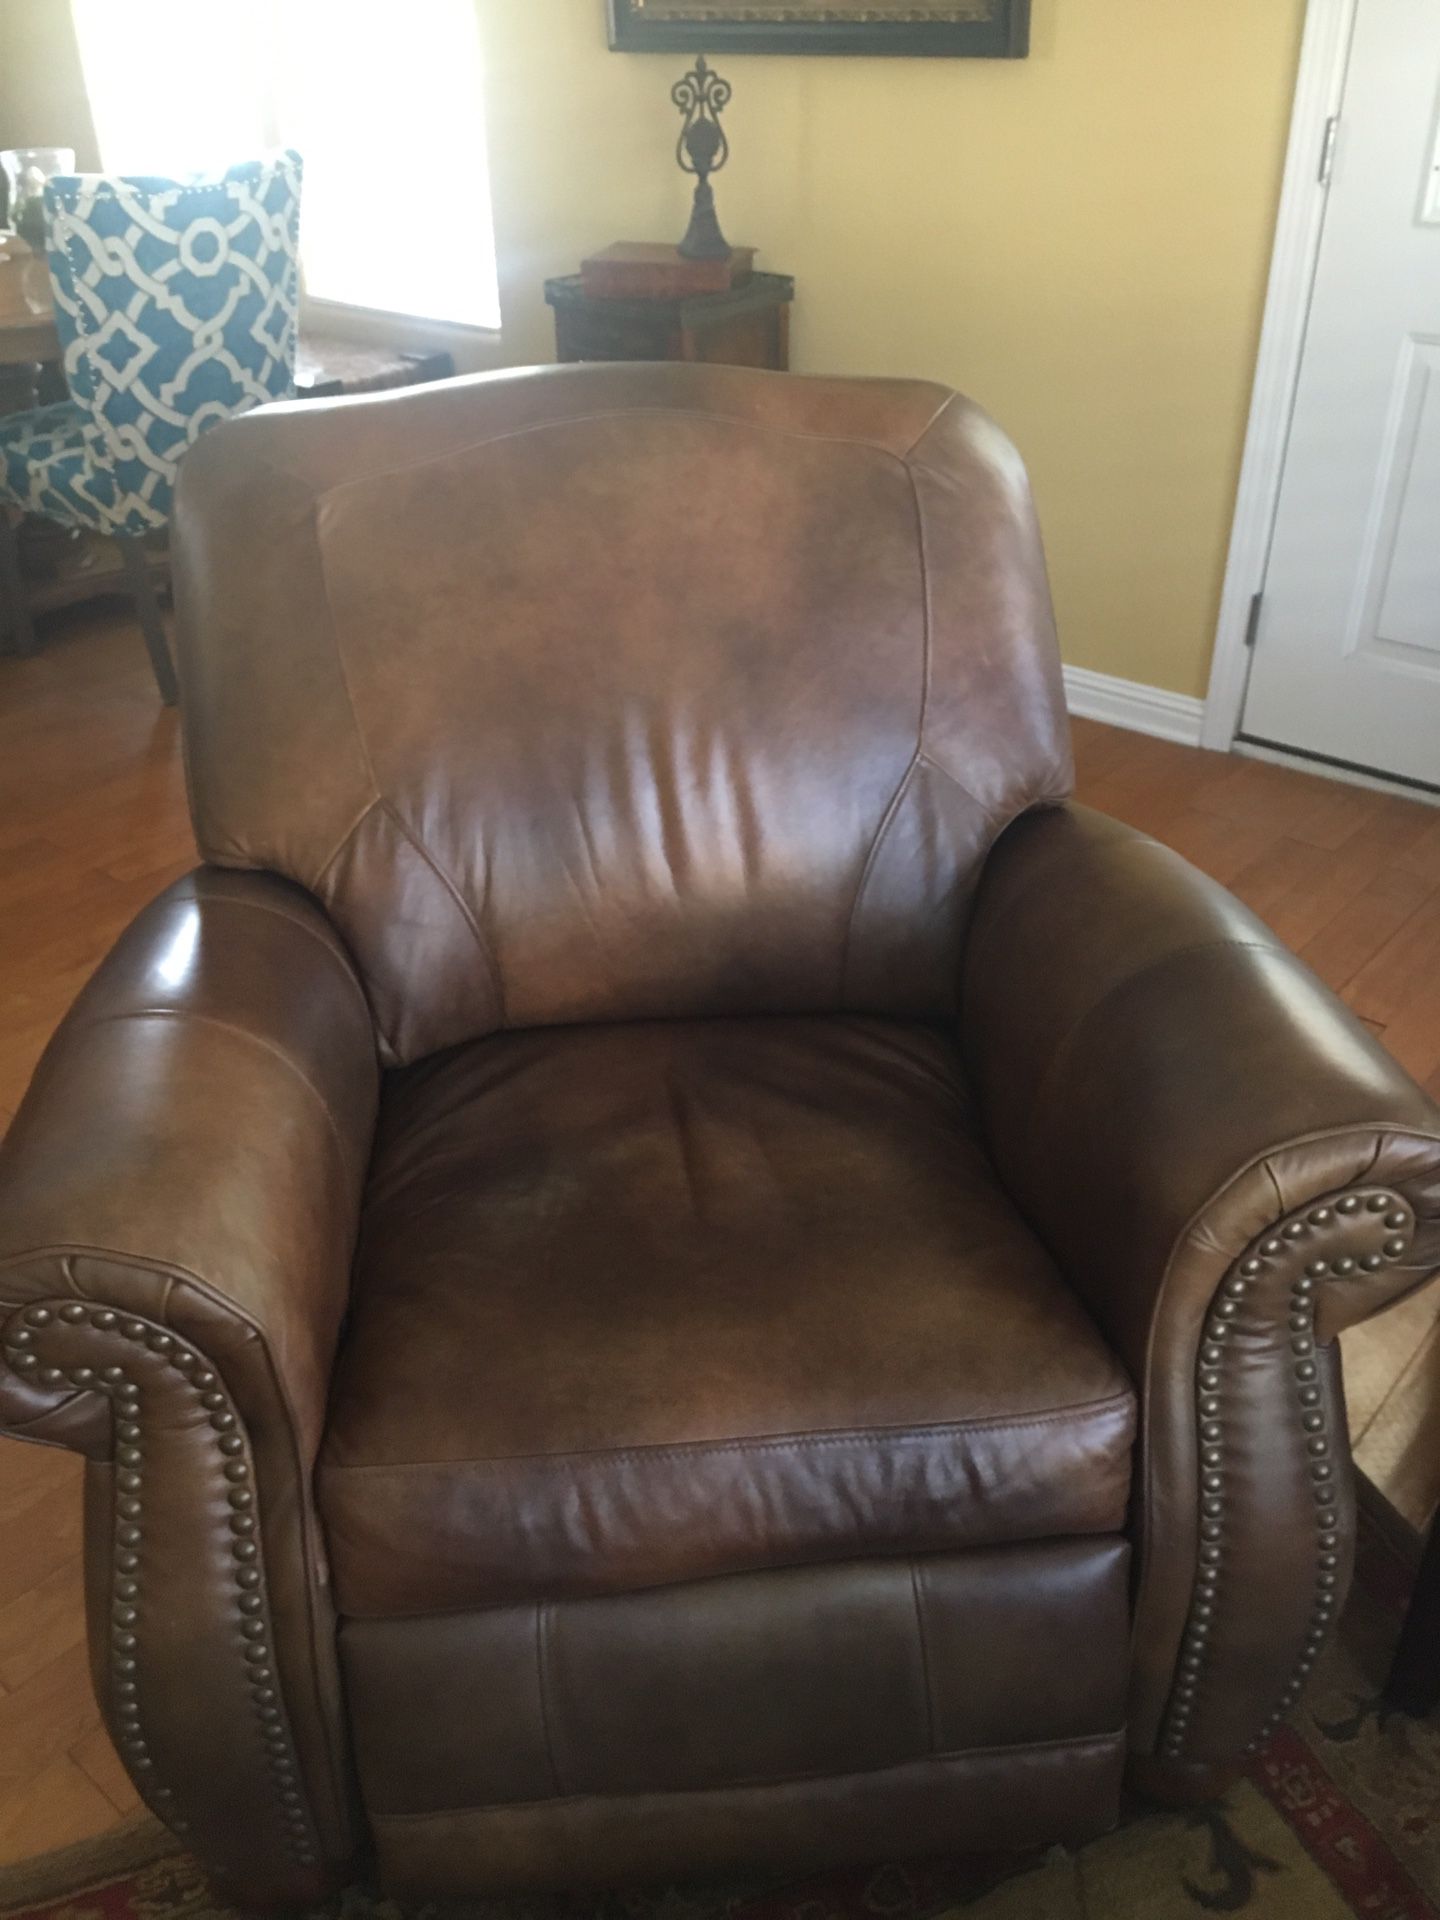 Recliner leather